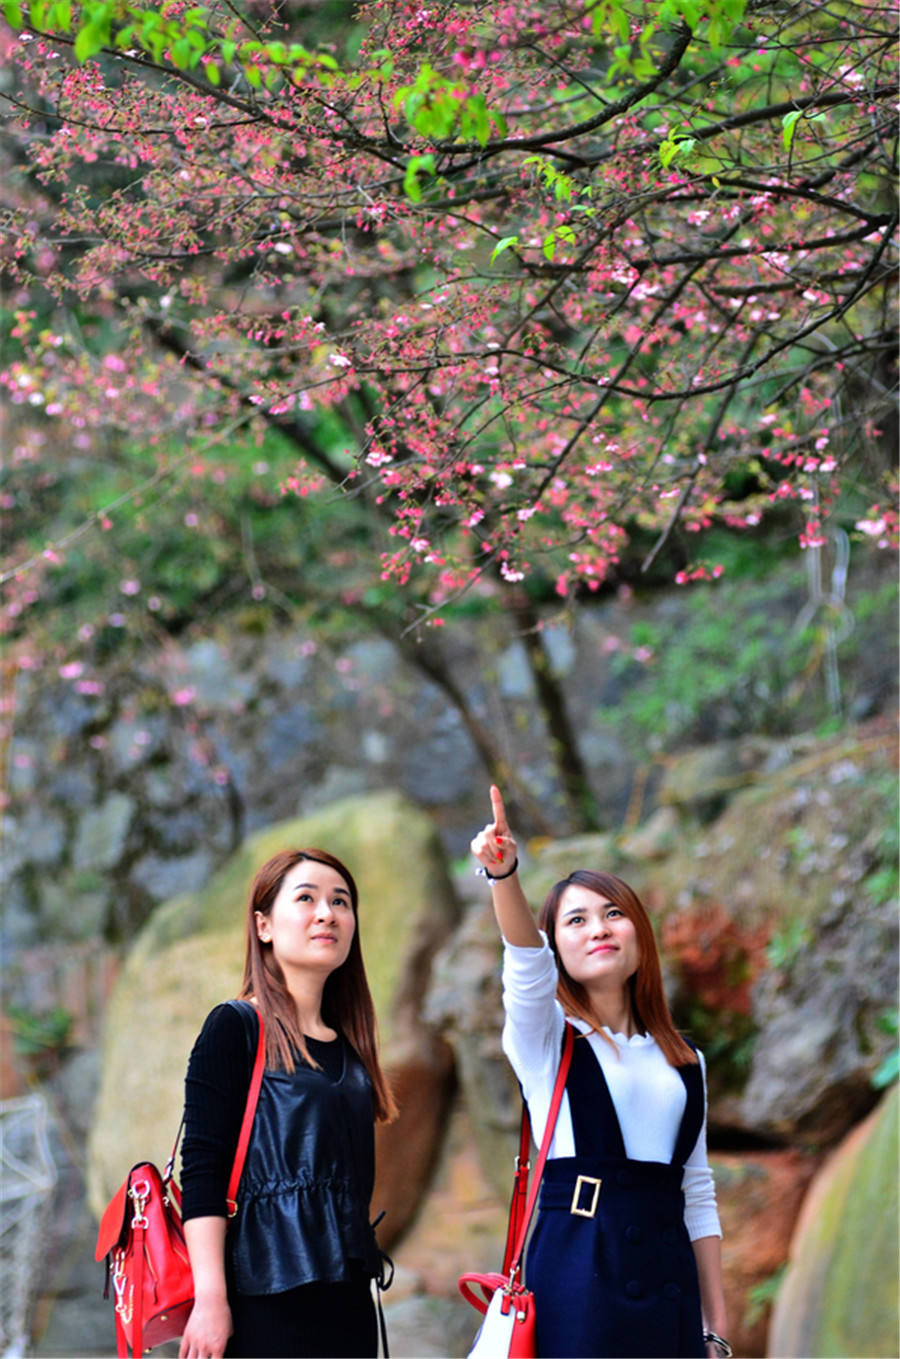 Cherry blossoms attract bees and tourists in Hunan